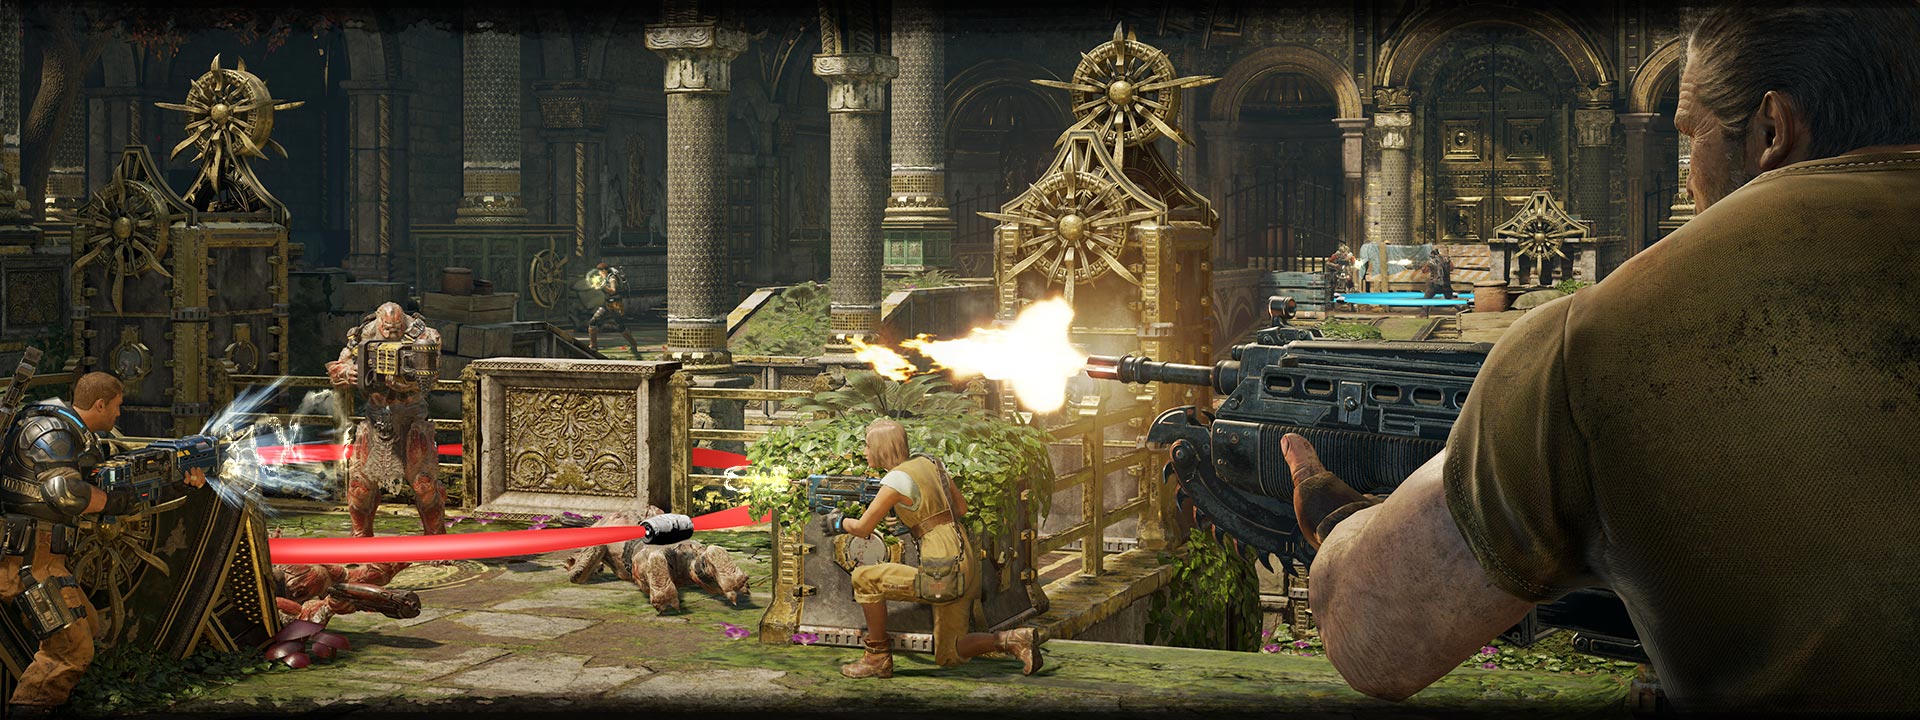 Several characters in battle scene in relic setting